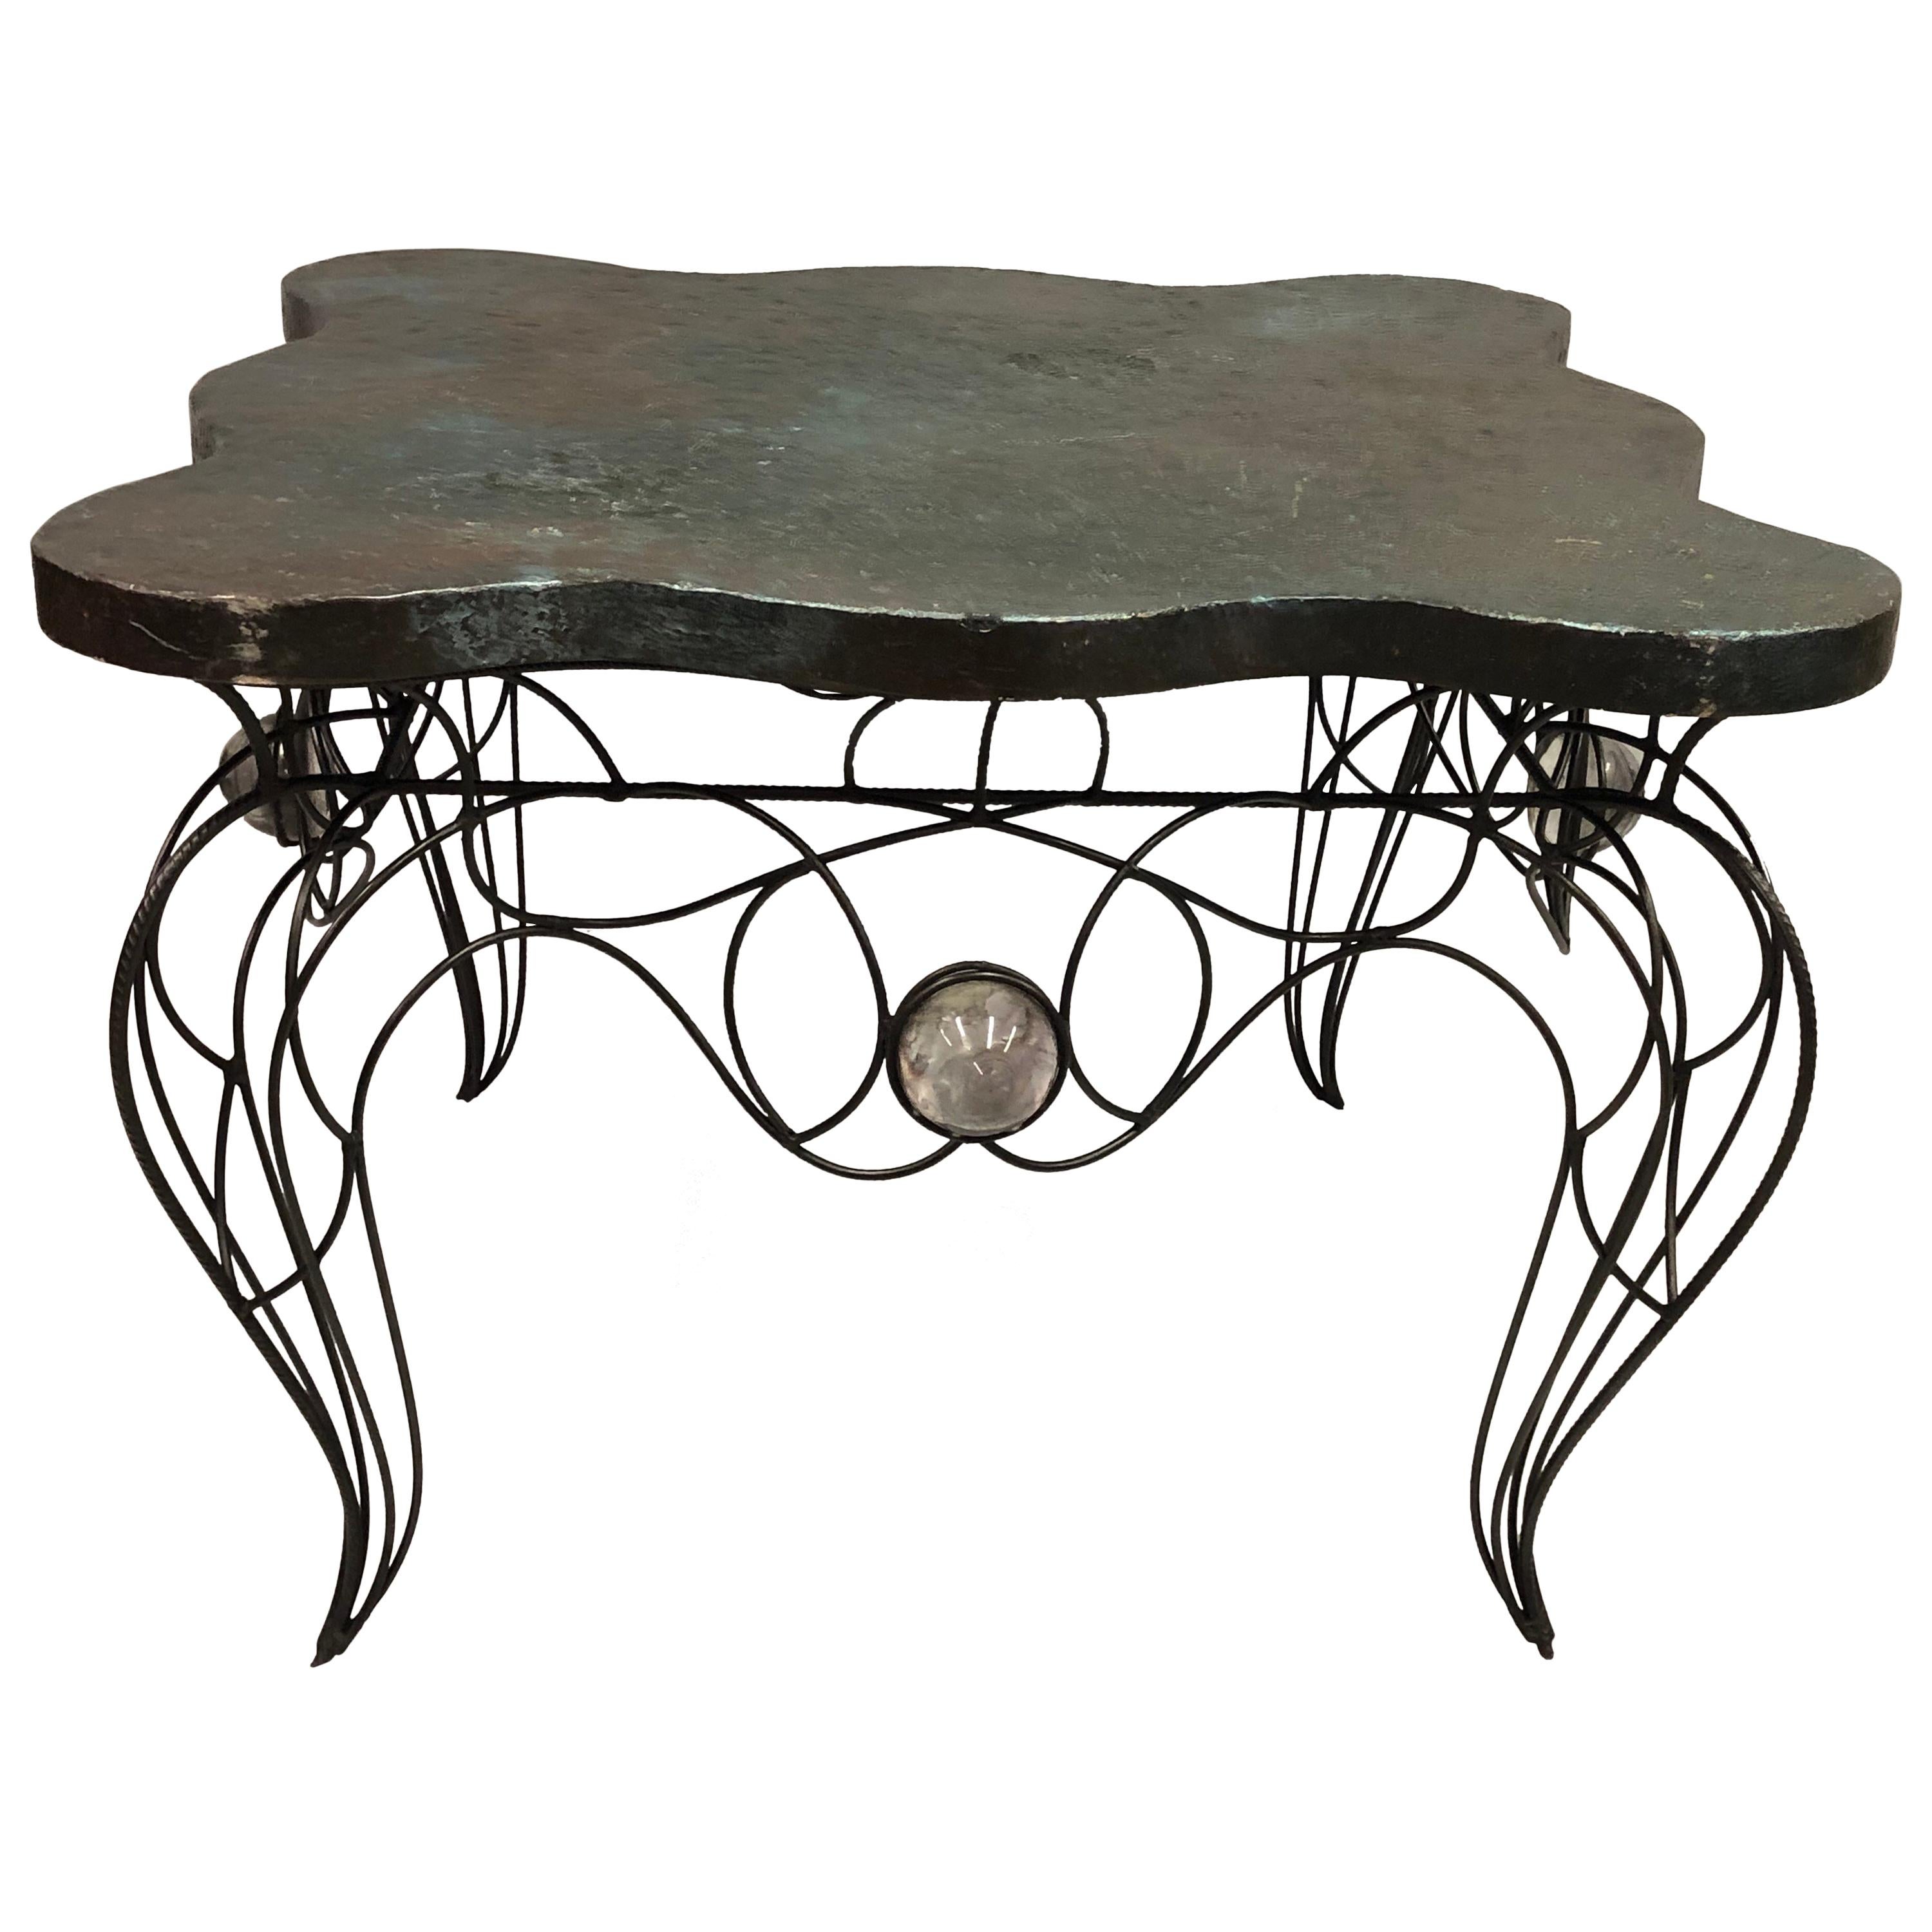 Unique Handwrought Iron & Crystal Center or Dining Table by Andre Dubreuil, 1986